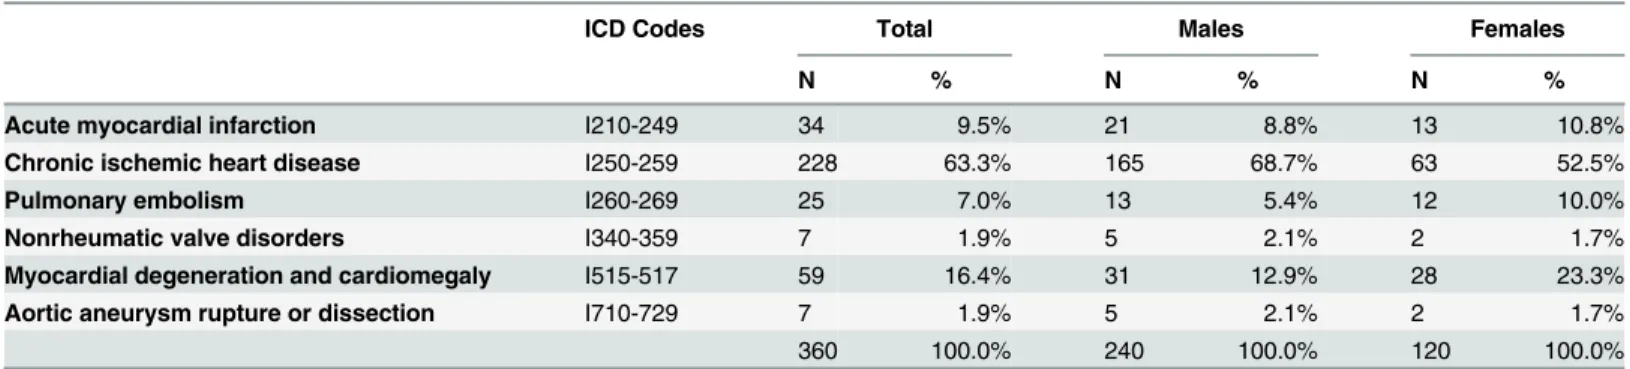 Table 1. Characterization of the case population according to ICD (International Classification of Diseases) diagnoses and gender distribution.